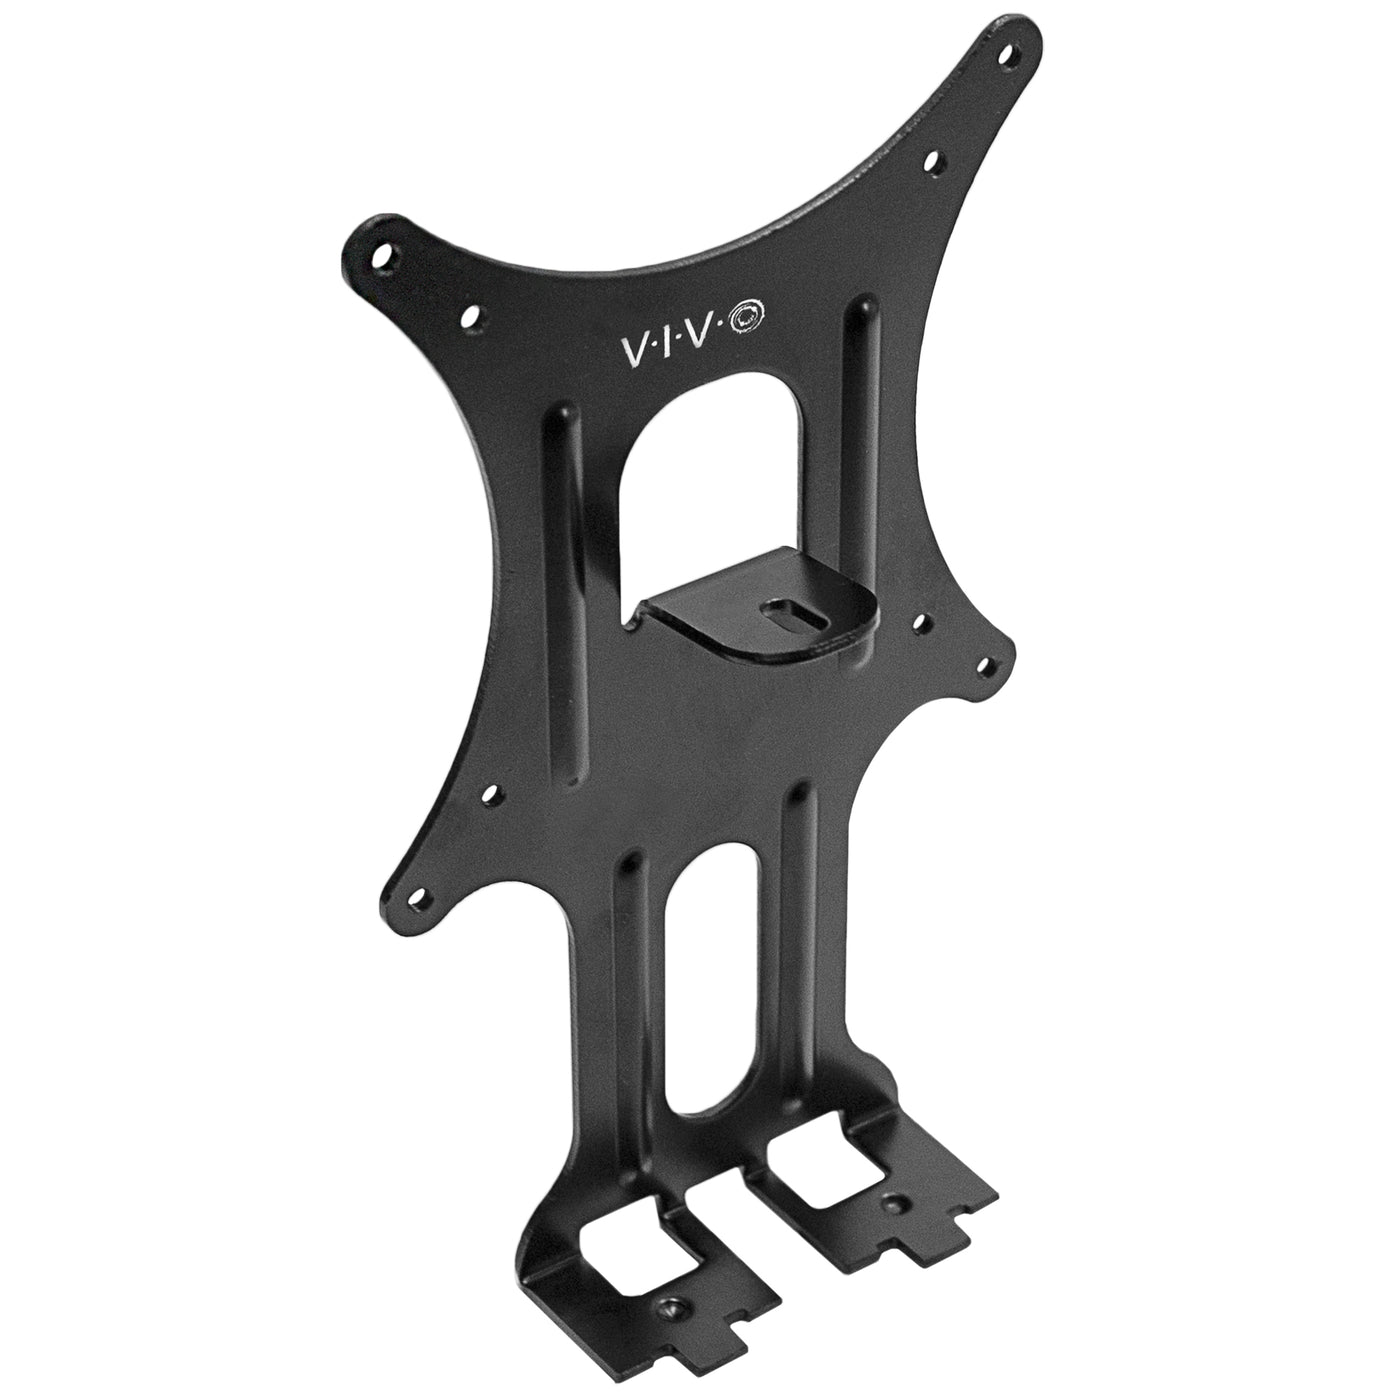 Quick attach VESA adapter for HP monitor mounting capabilities.